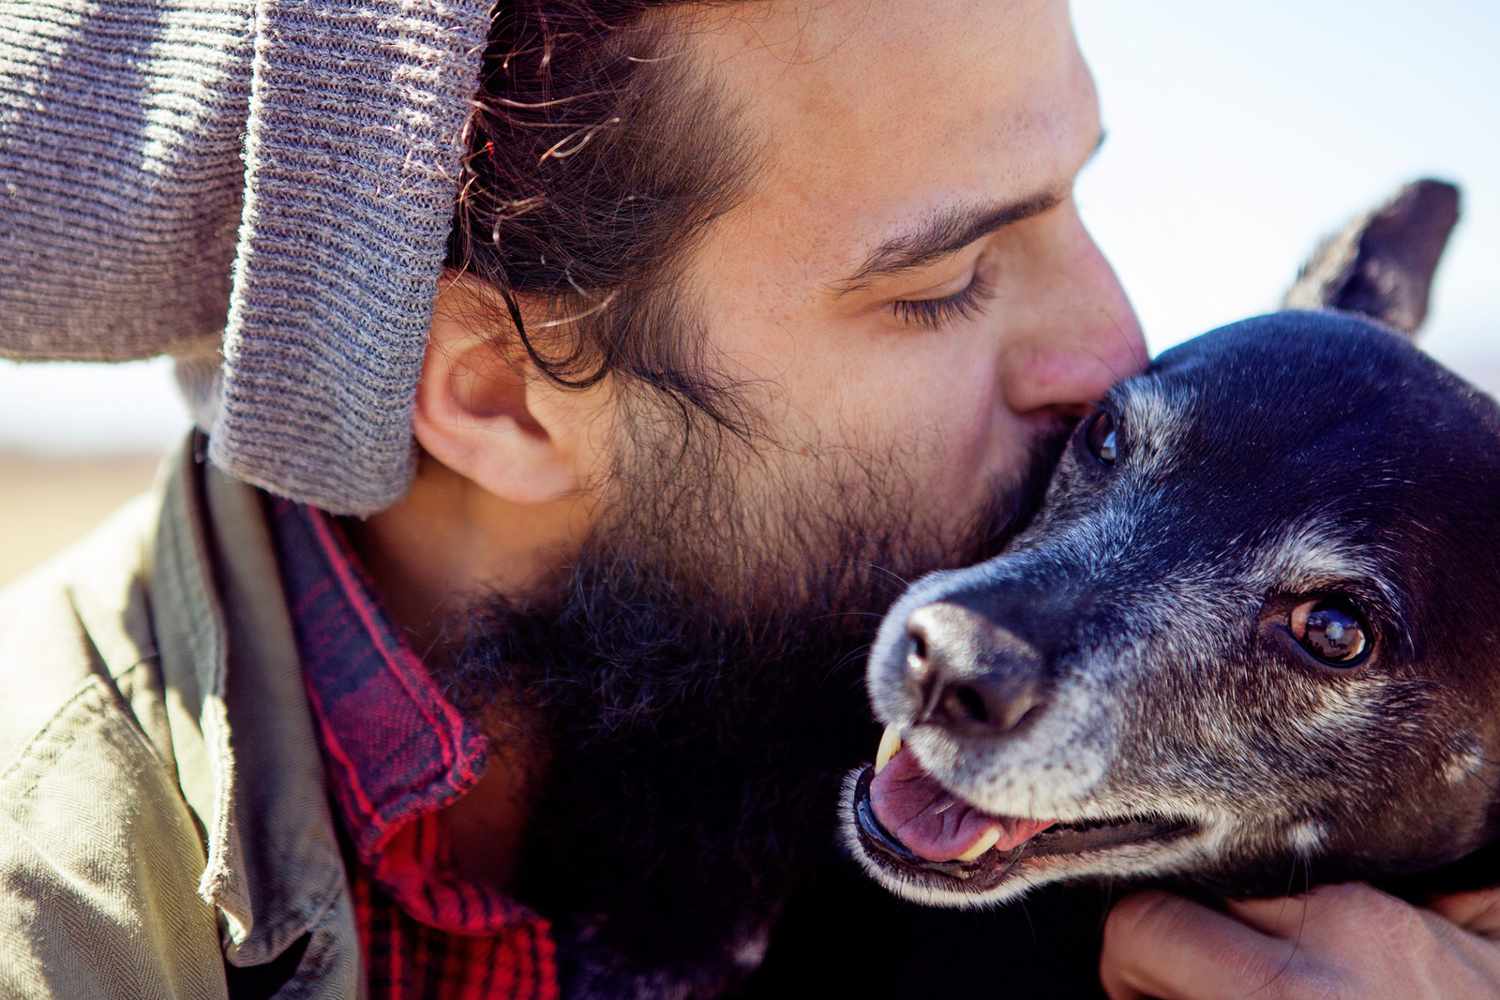 Man with beard kisses black and white dog on the cheek